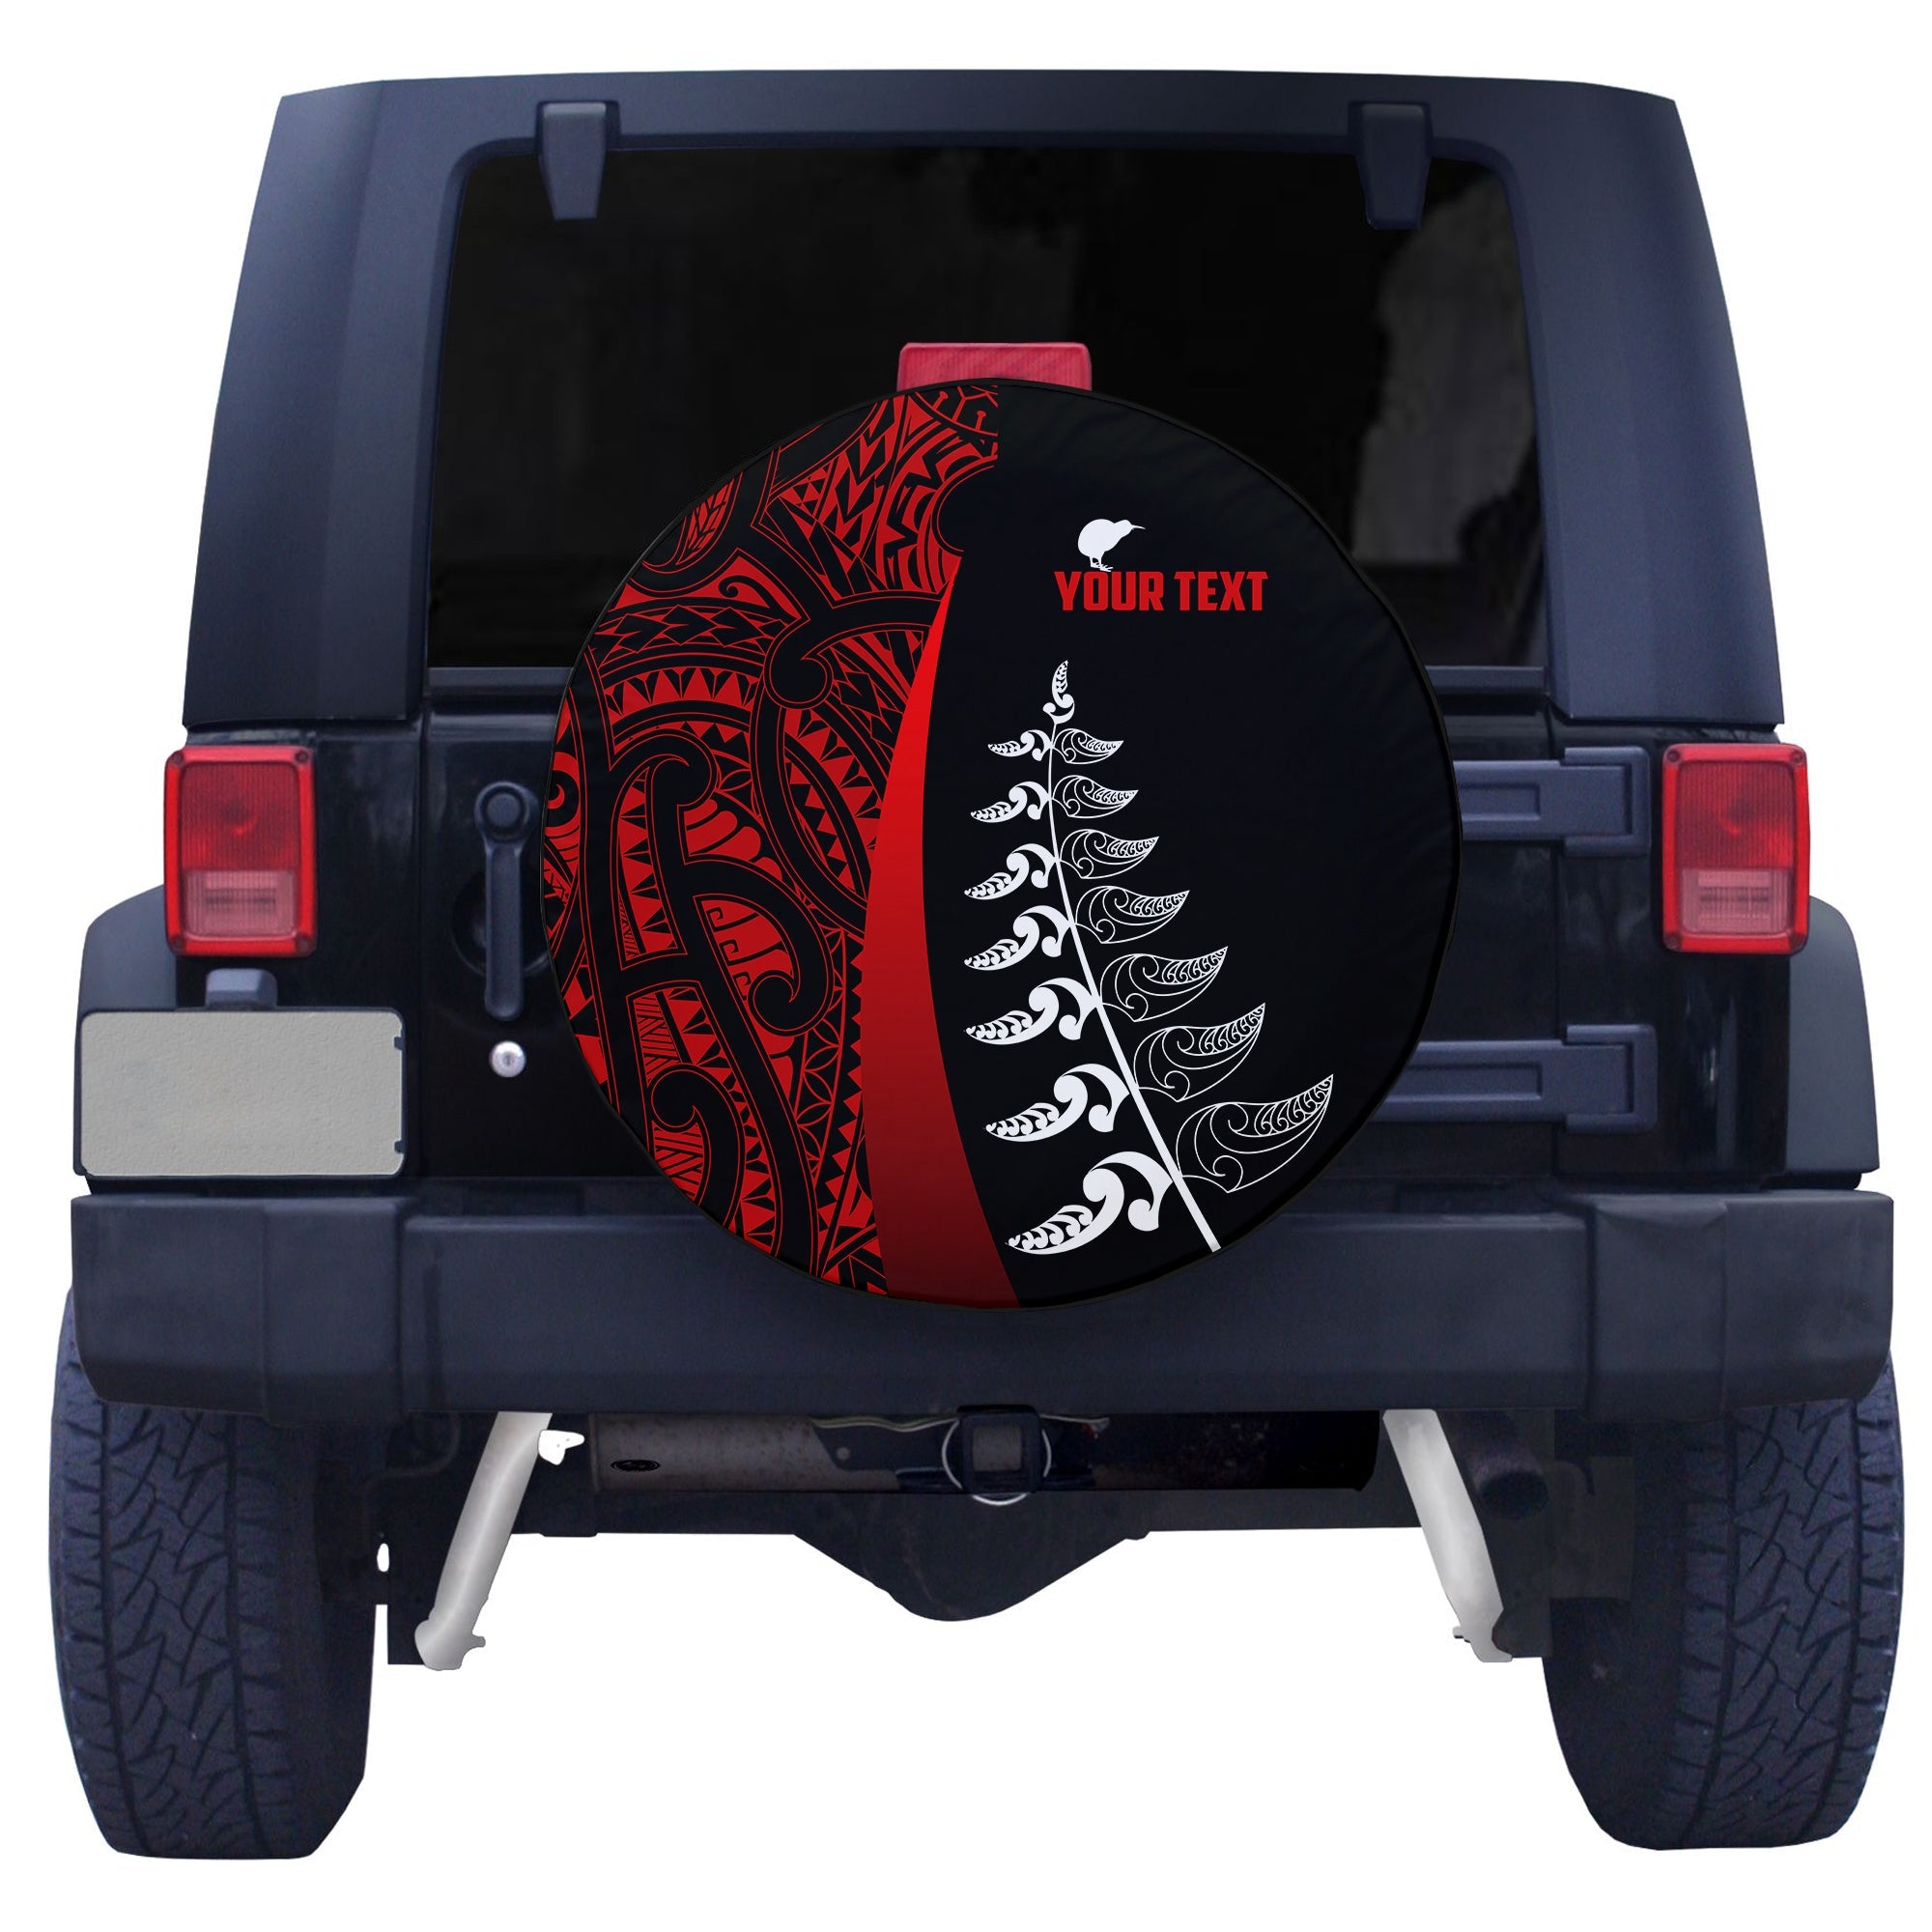 (Custom Personalised) New Zealand Silver Fern Rugby Spare Tire Cover Maori Pattern LT13 Black - Polynesian Pride